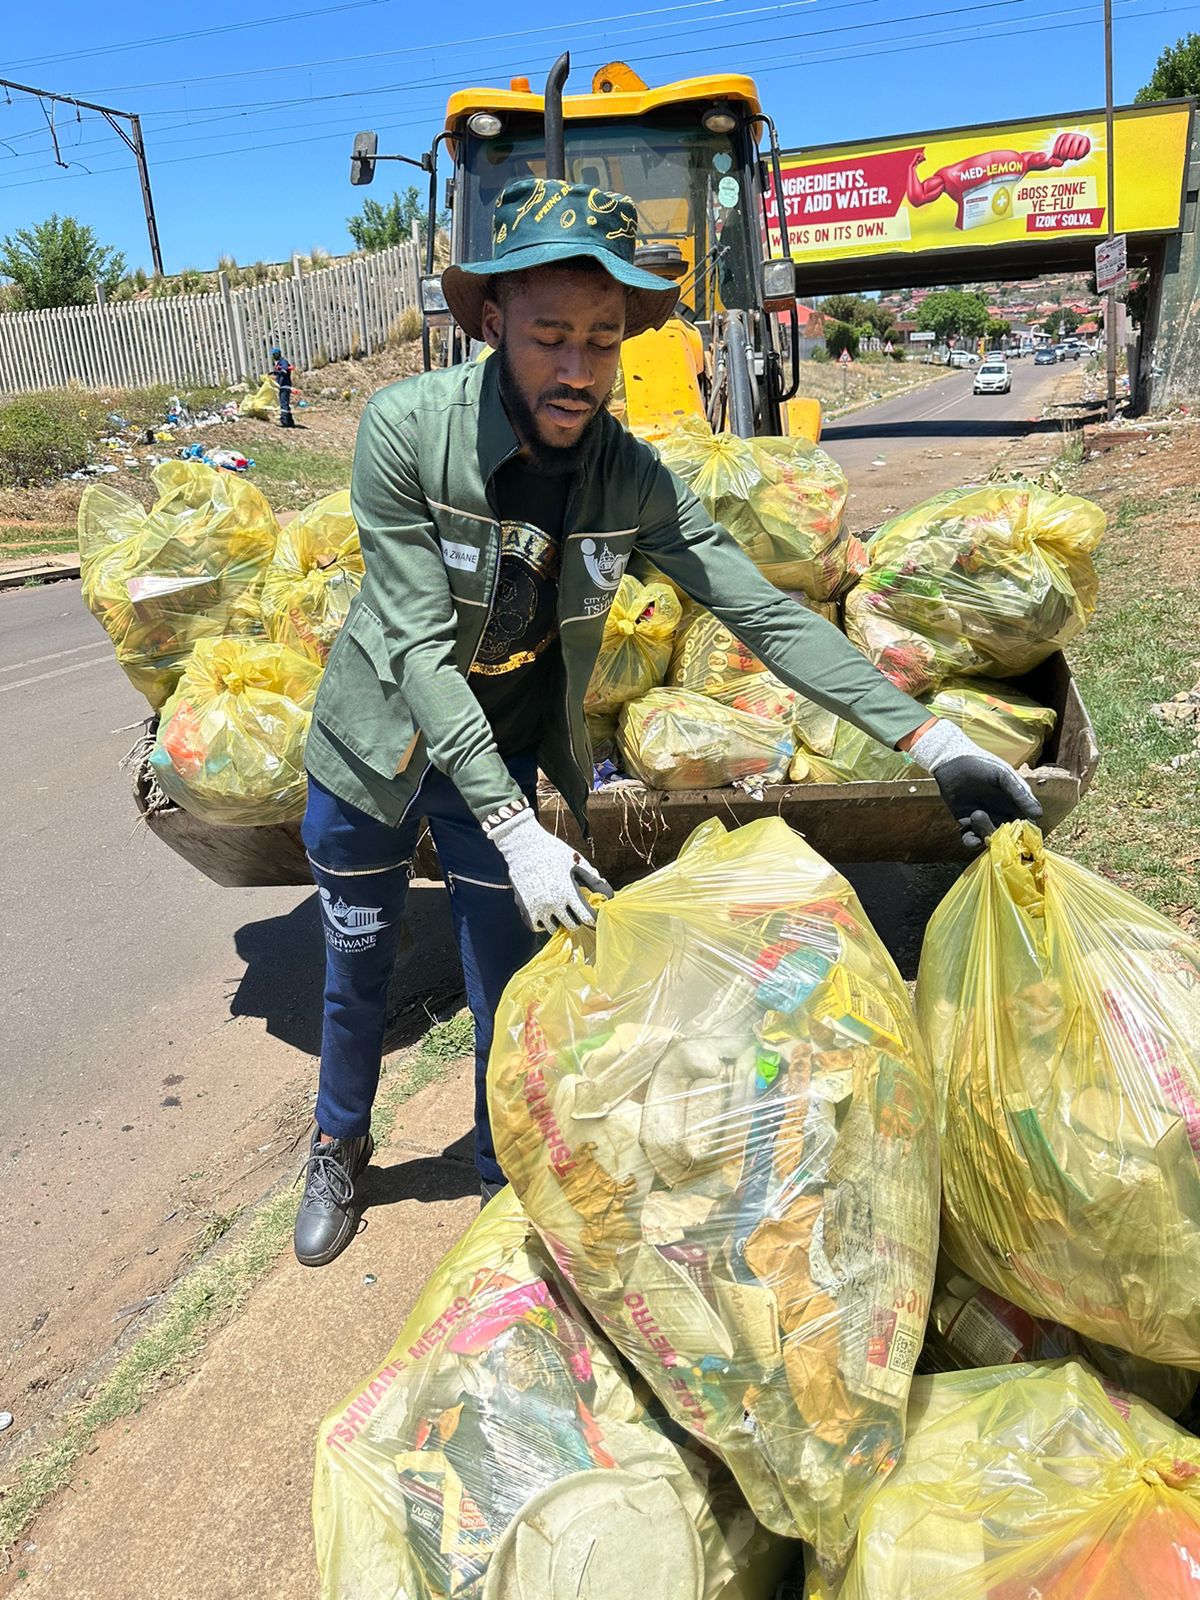 Getting his hands dirty City of Tshwane MMC for Environment and Agriculture Management Ziyanda Zwane put on overall and went to the street of Atteridgville in Tshwane 